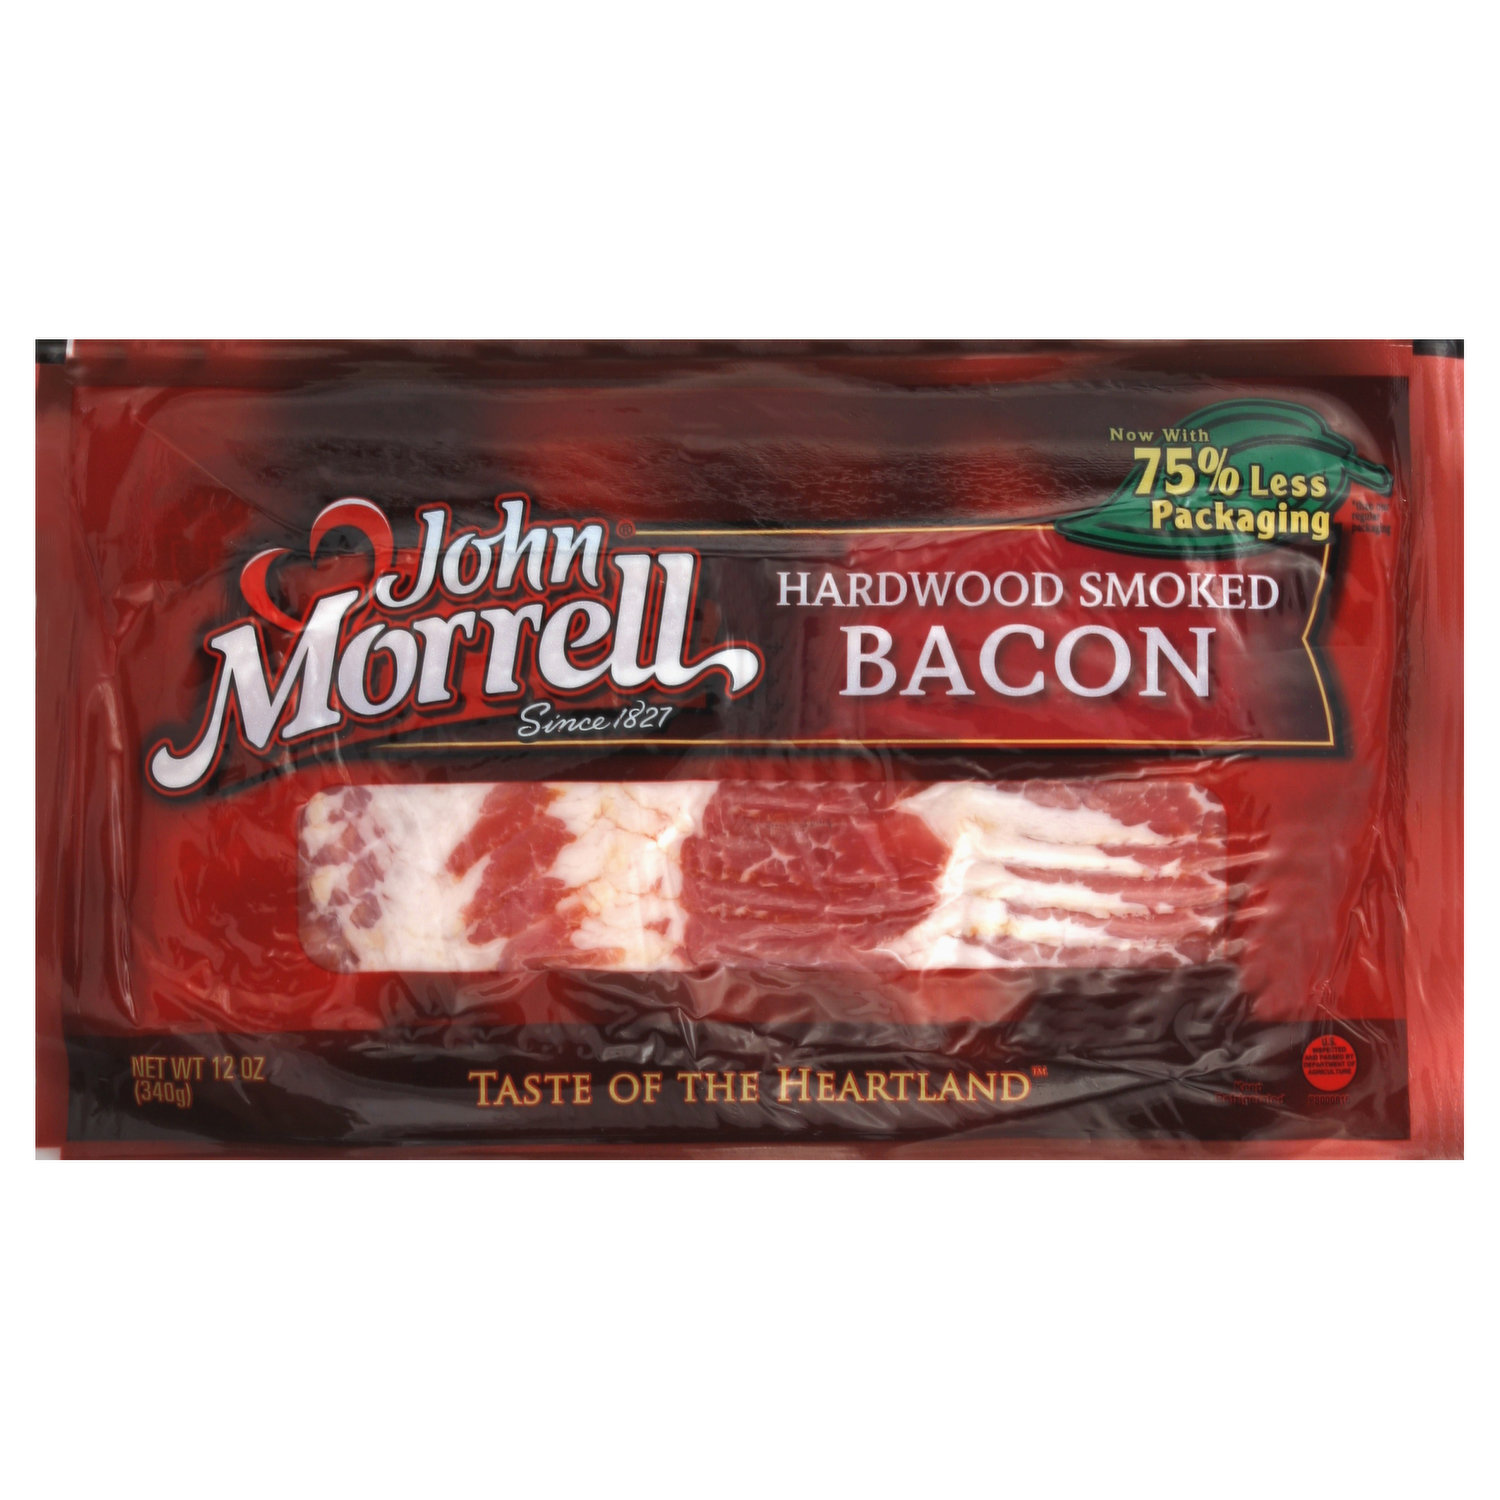 Two Men and a Little Farm: BEEF BACON BY JOHN MORRELL